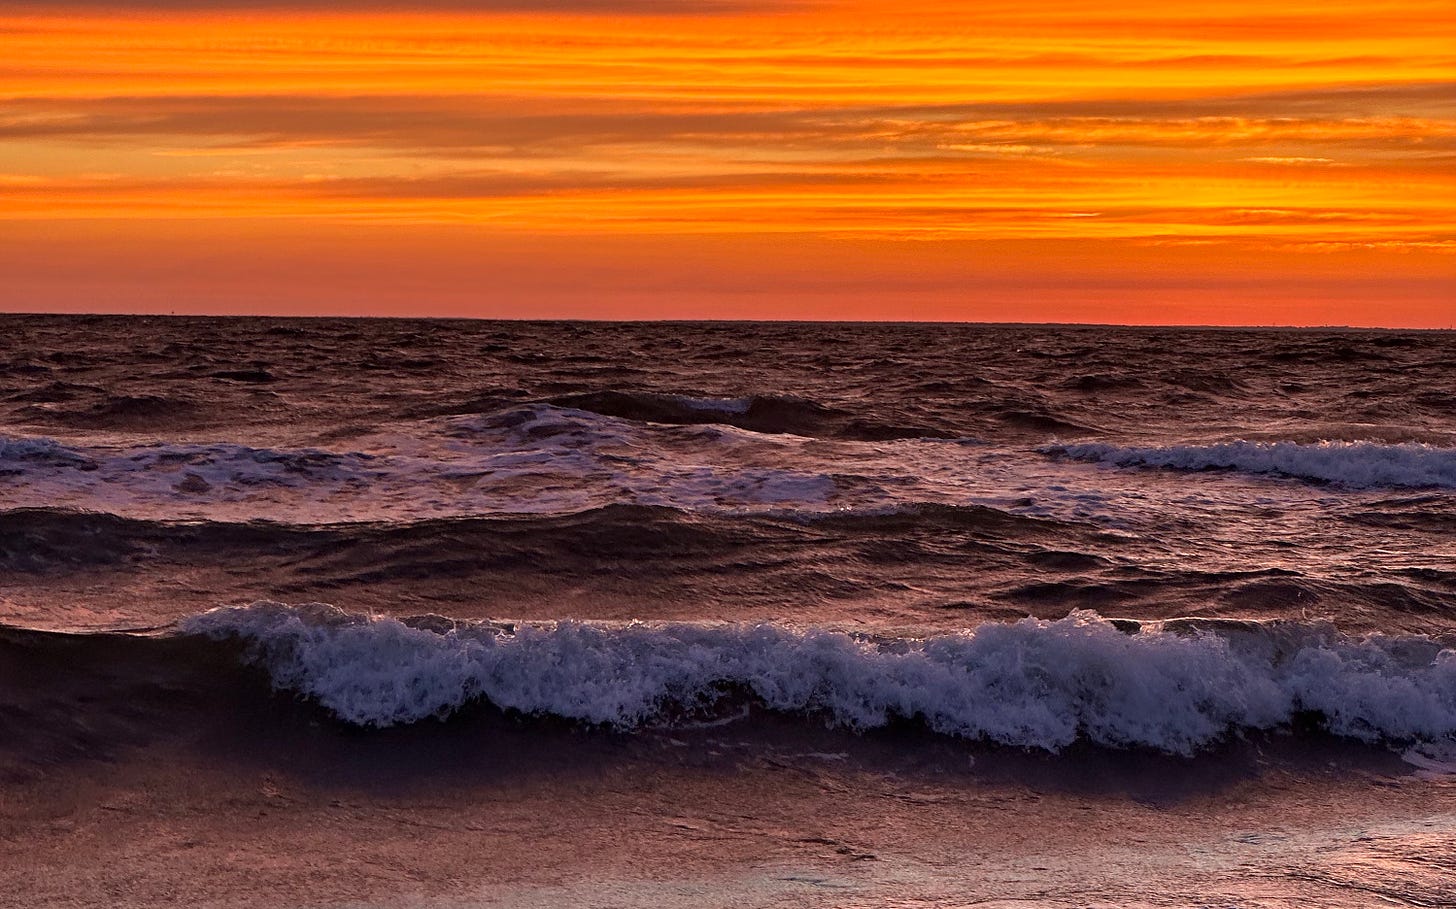 a very orange and red sunset on the beach